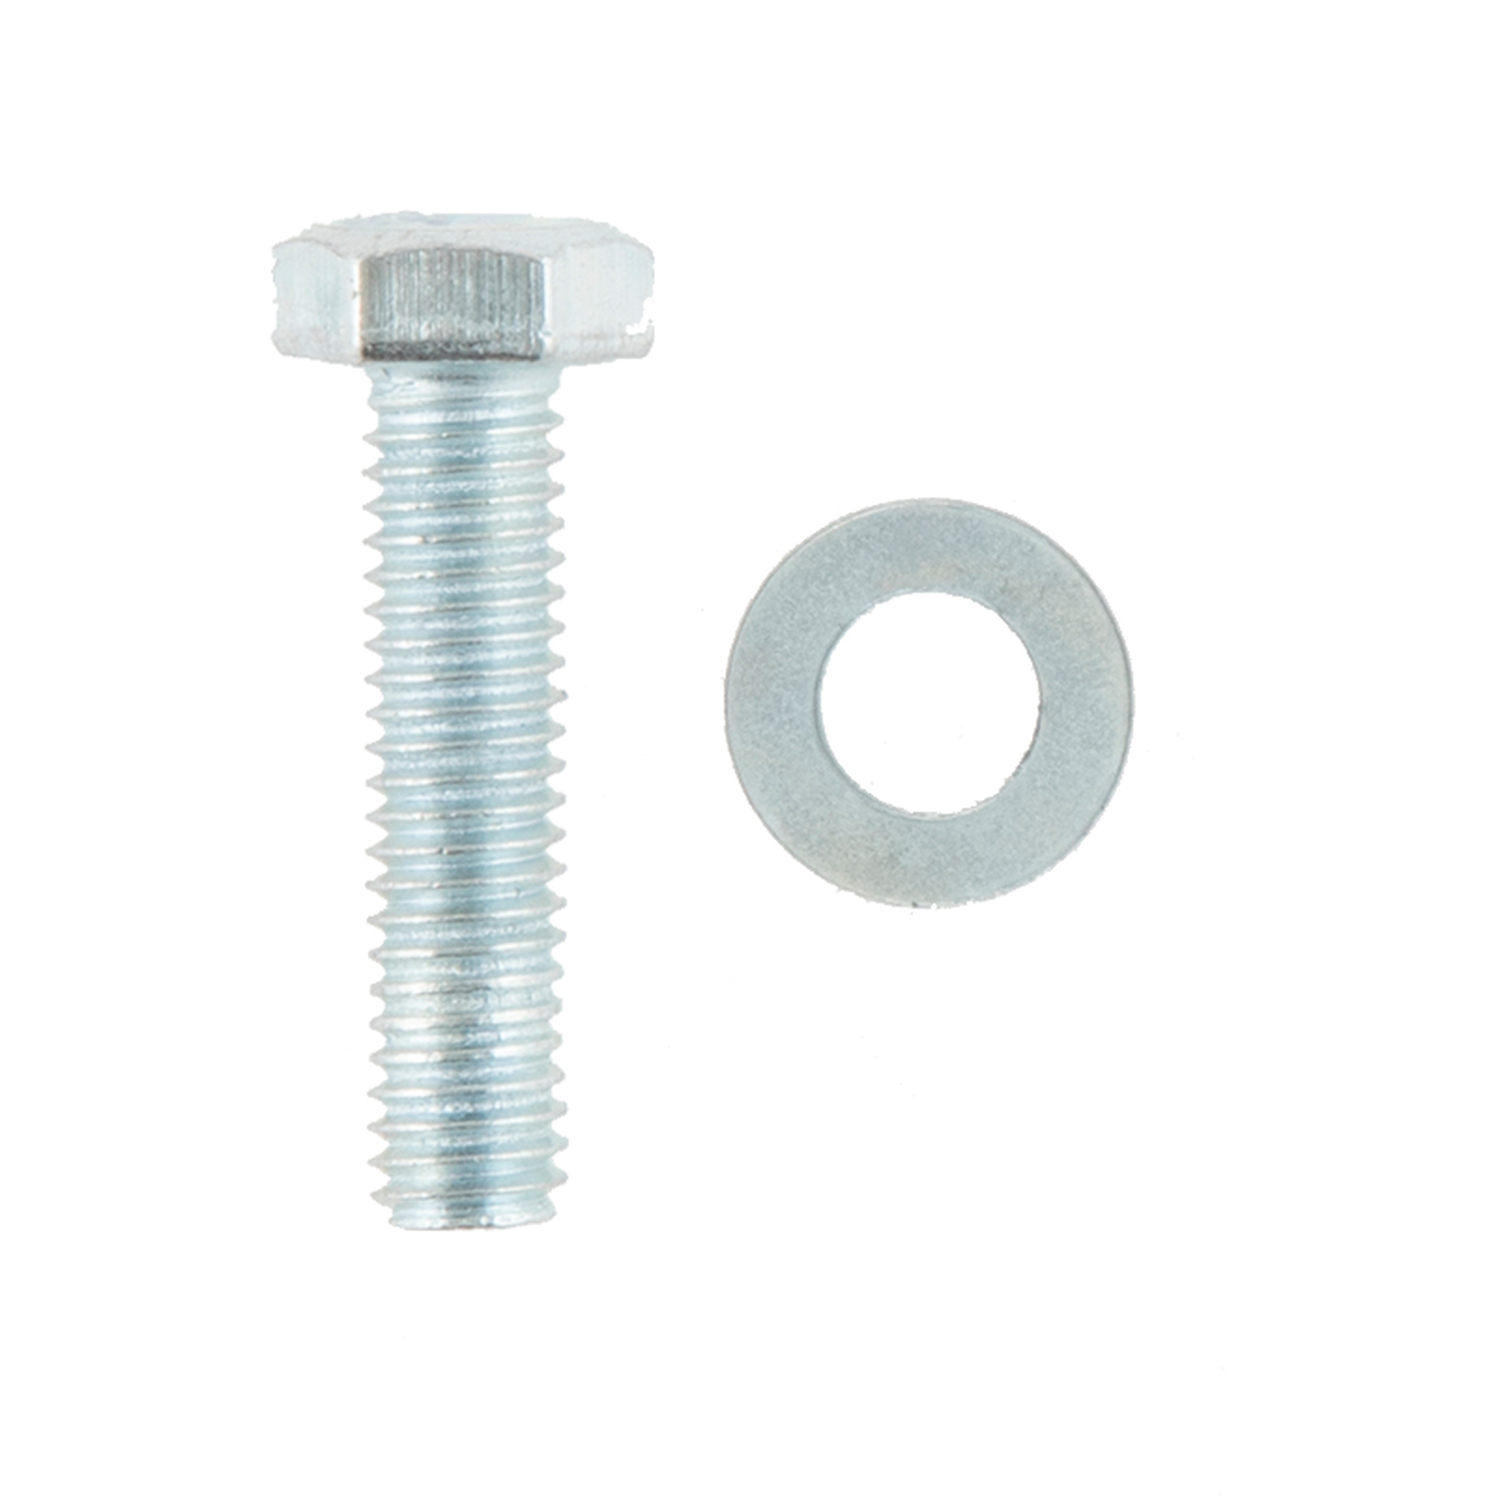 Hiatt M6 x 25mm Hex Bolt Nut and Washer 12 Pack Image 2